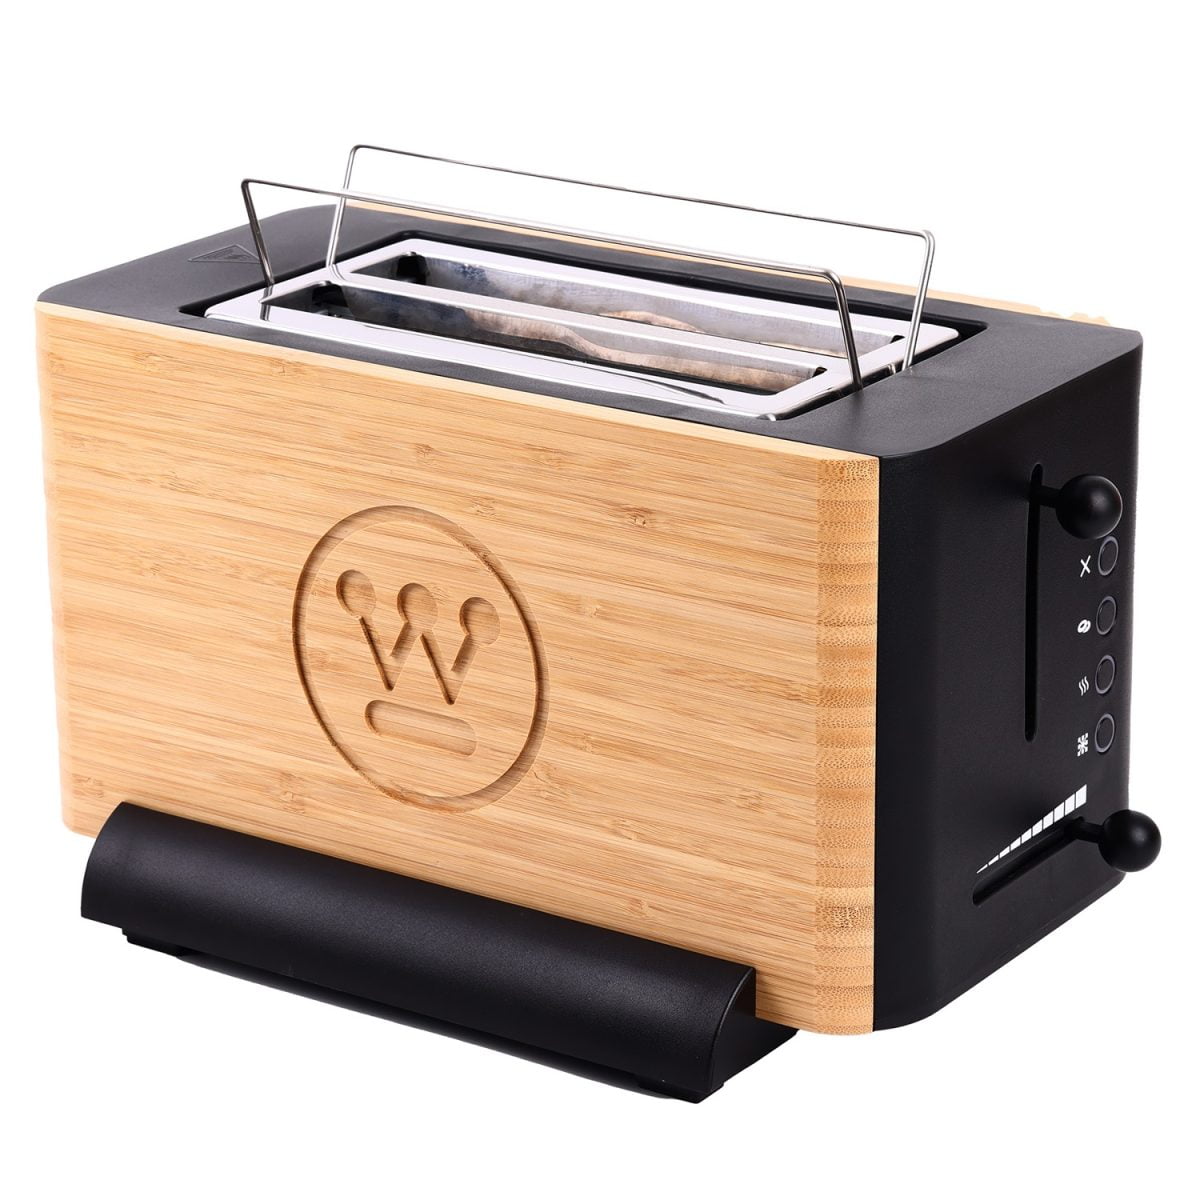 Bamboo Toaster Red Dot 1 Westinghouse &Amp;Lt;P Data-Sourcepos=&Amp;Quot;1:1-1:86&Amp;Quot;&Amp;Gt;Toast Your Mornings To Perfection With The Eco-Friendly Westinghouse Bamboo Toaster&Amp;Lt;/P&Amp;Gt; &Amp;Lt;P Data-Sourcepos=&Amp;Quot;3:1-3:52&Amp;Quot;&Amp;Gt;&Amp;Lt;Strong&Amp;Gt;Introducing The Westinghouse Bamboo Toaster, Where Sustainable Style Meets Perfectly Browned Bread.&Amp;Lt;/Strong&Amp;Gt; This Beautiful Toaster Seamlessly Blends Natural Bamboo With Top-Tier Features, Elevating Your Mornings With Delicious Toast And A Touch Of Green Consciousness.&Amp;Lt;/P&Amp;Gt; Westinghouse Bamboo Series Toaster Westinghouse Bamboo Series Toaster Wkttf04Bb